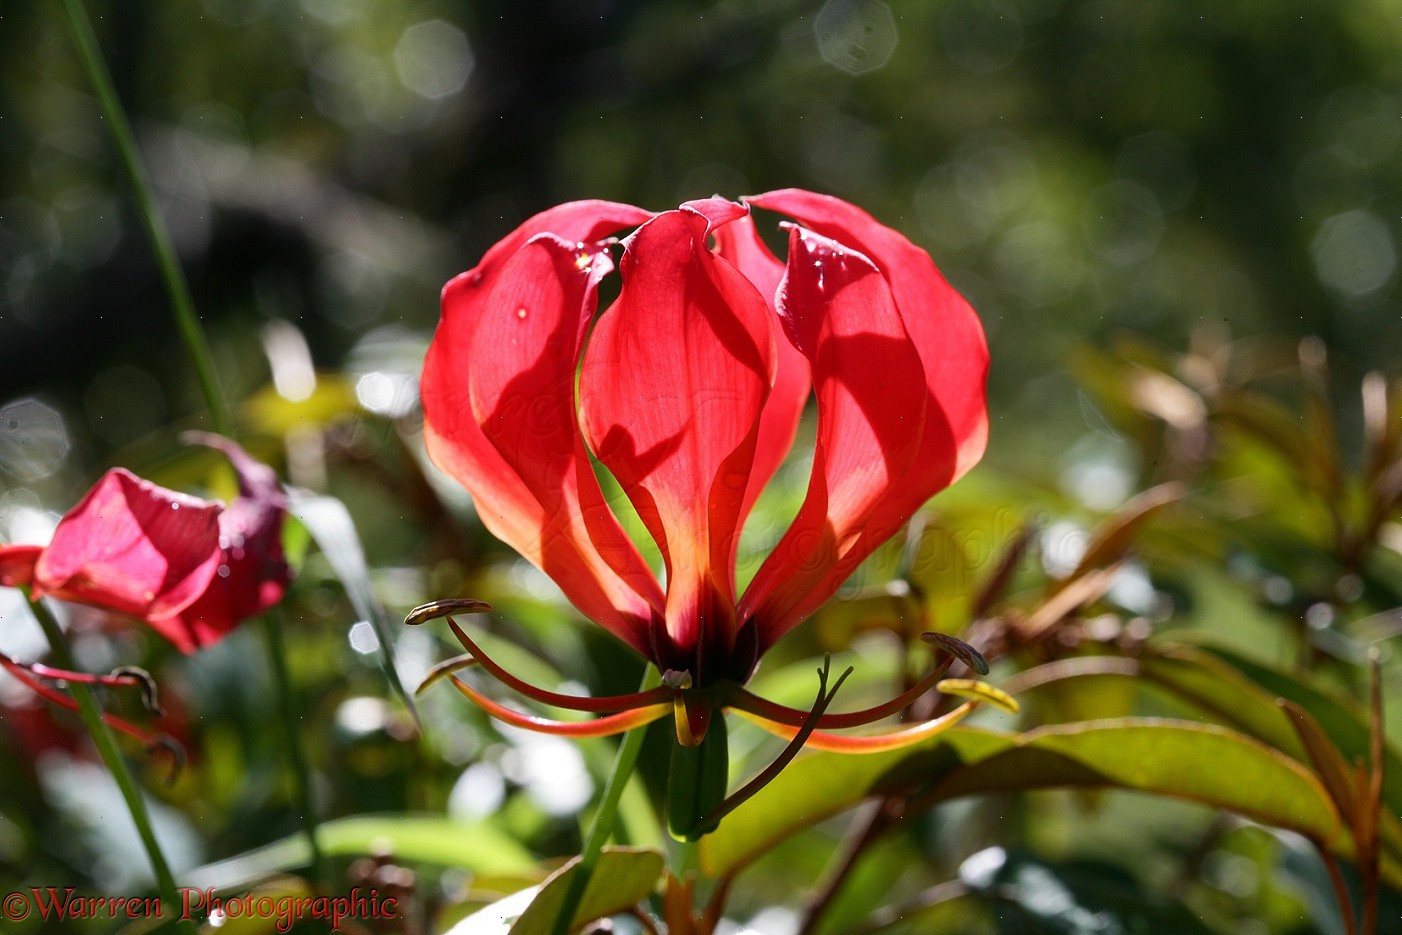 Pictures Of Flame Lily